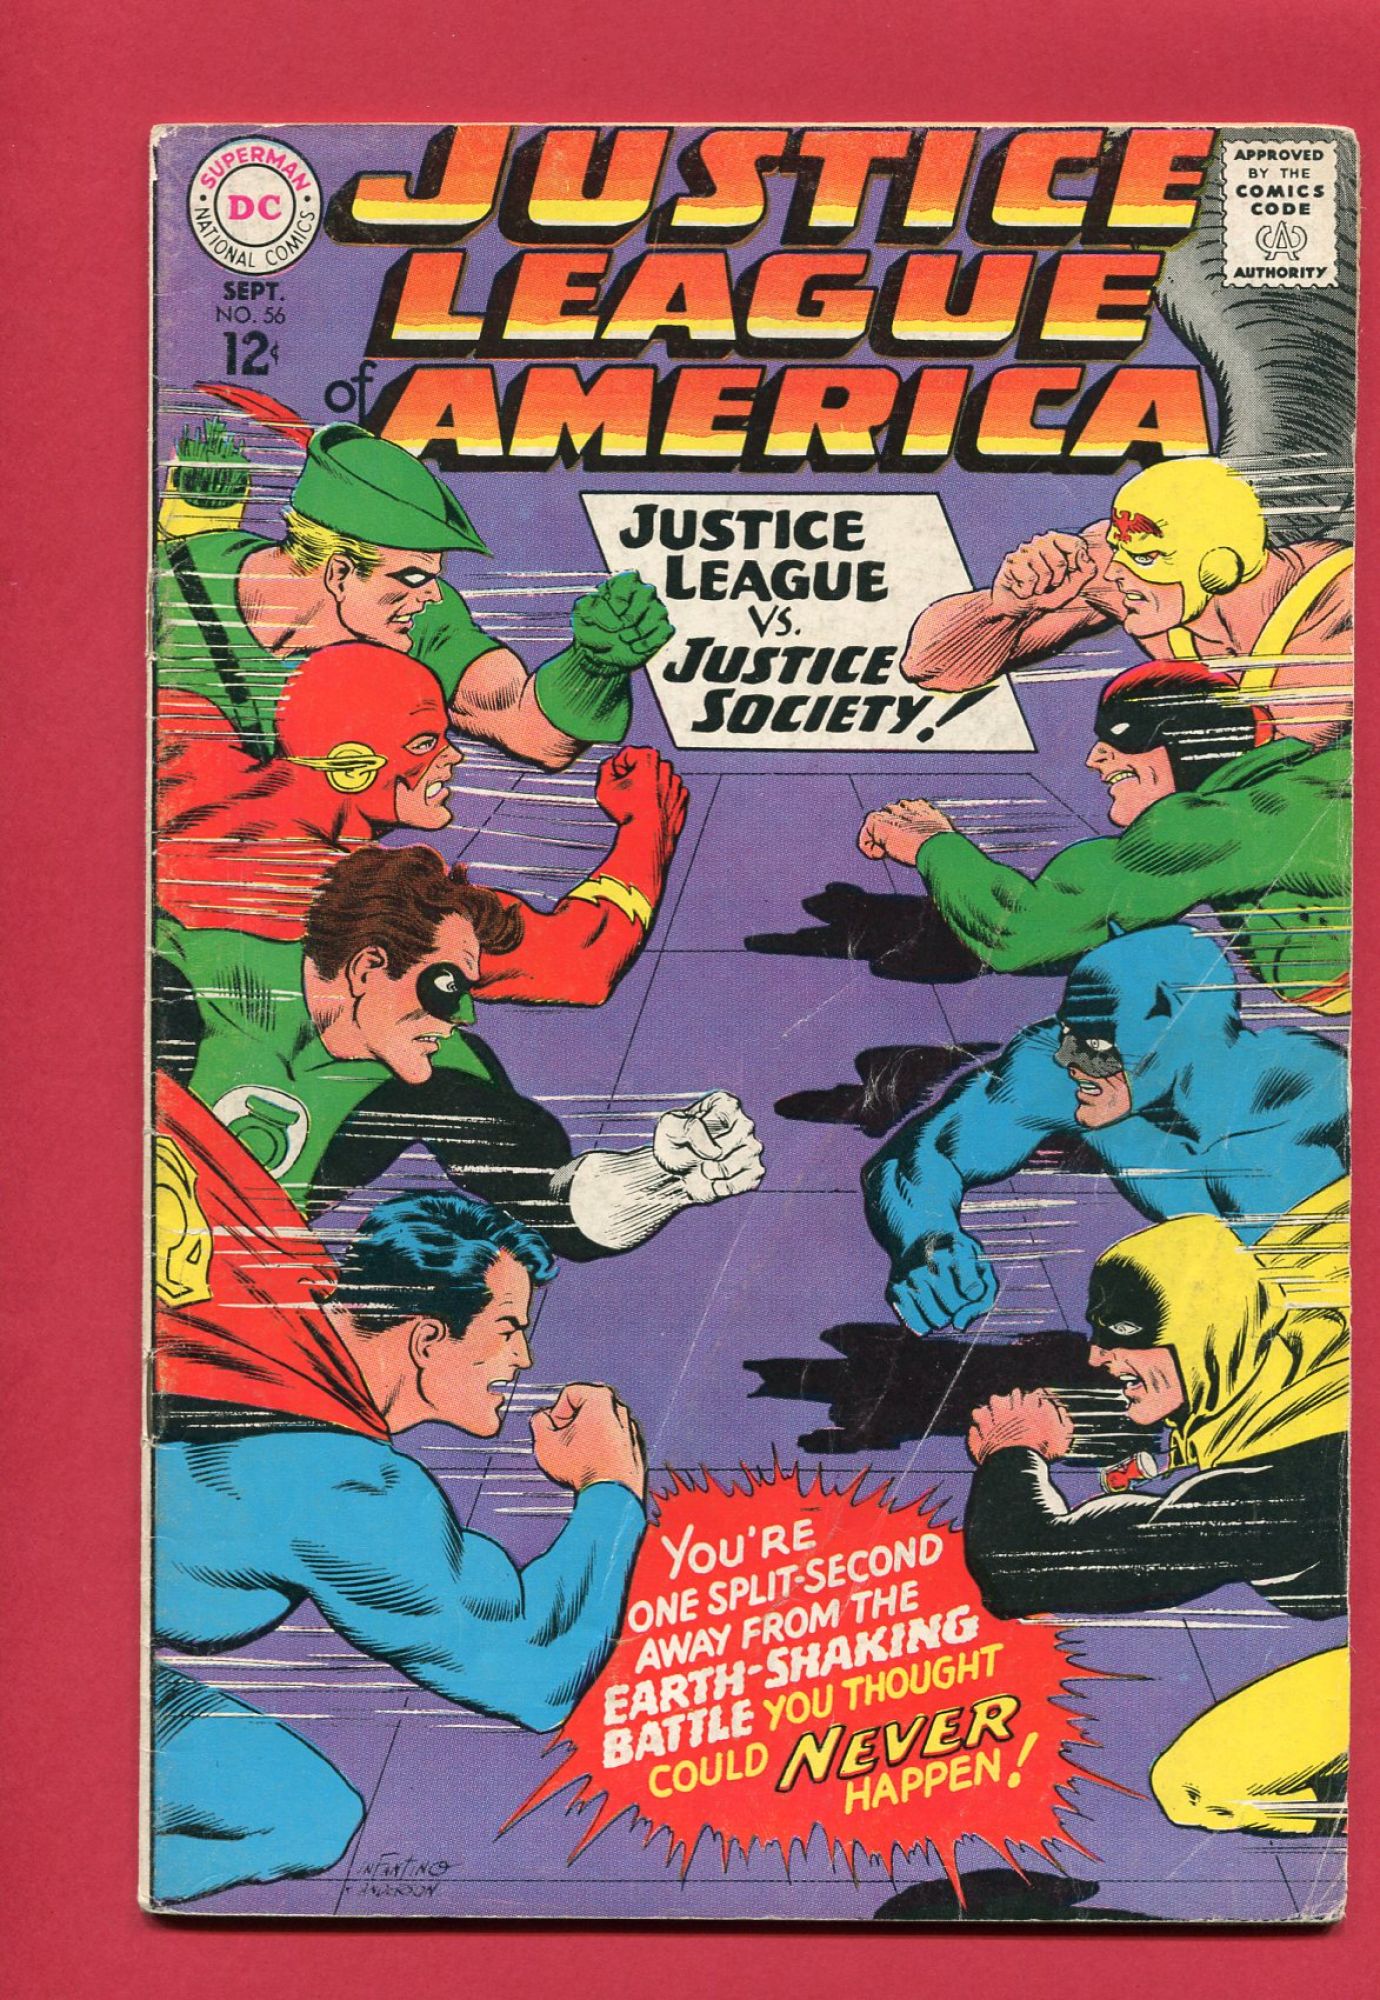 Justice League of America #56, Sep 1967, 3.5 VG-